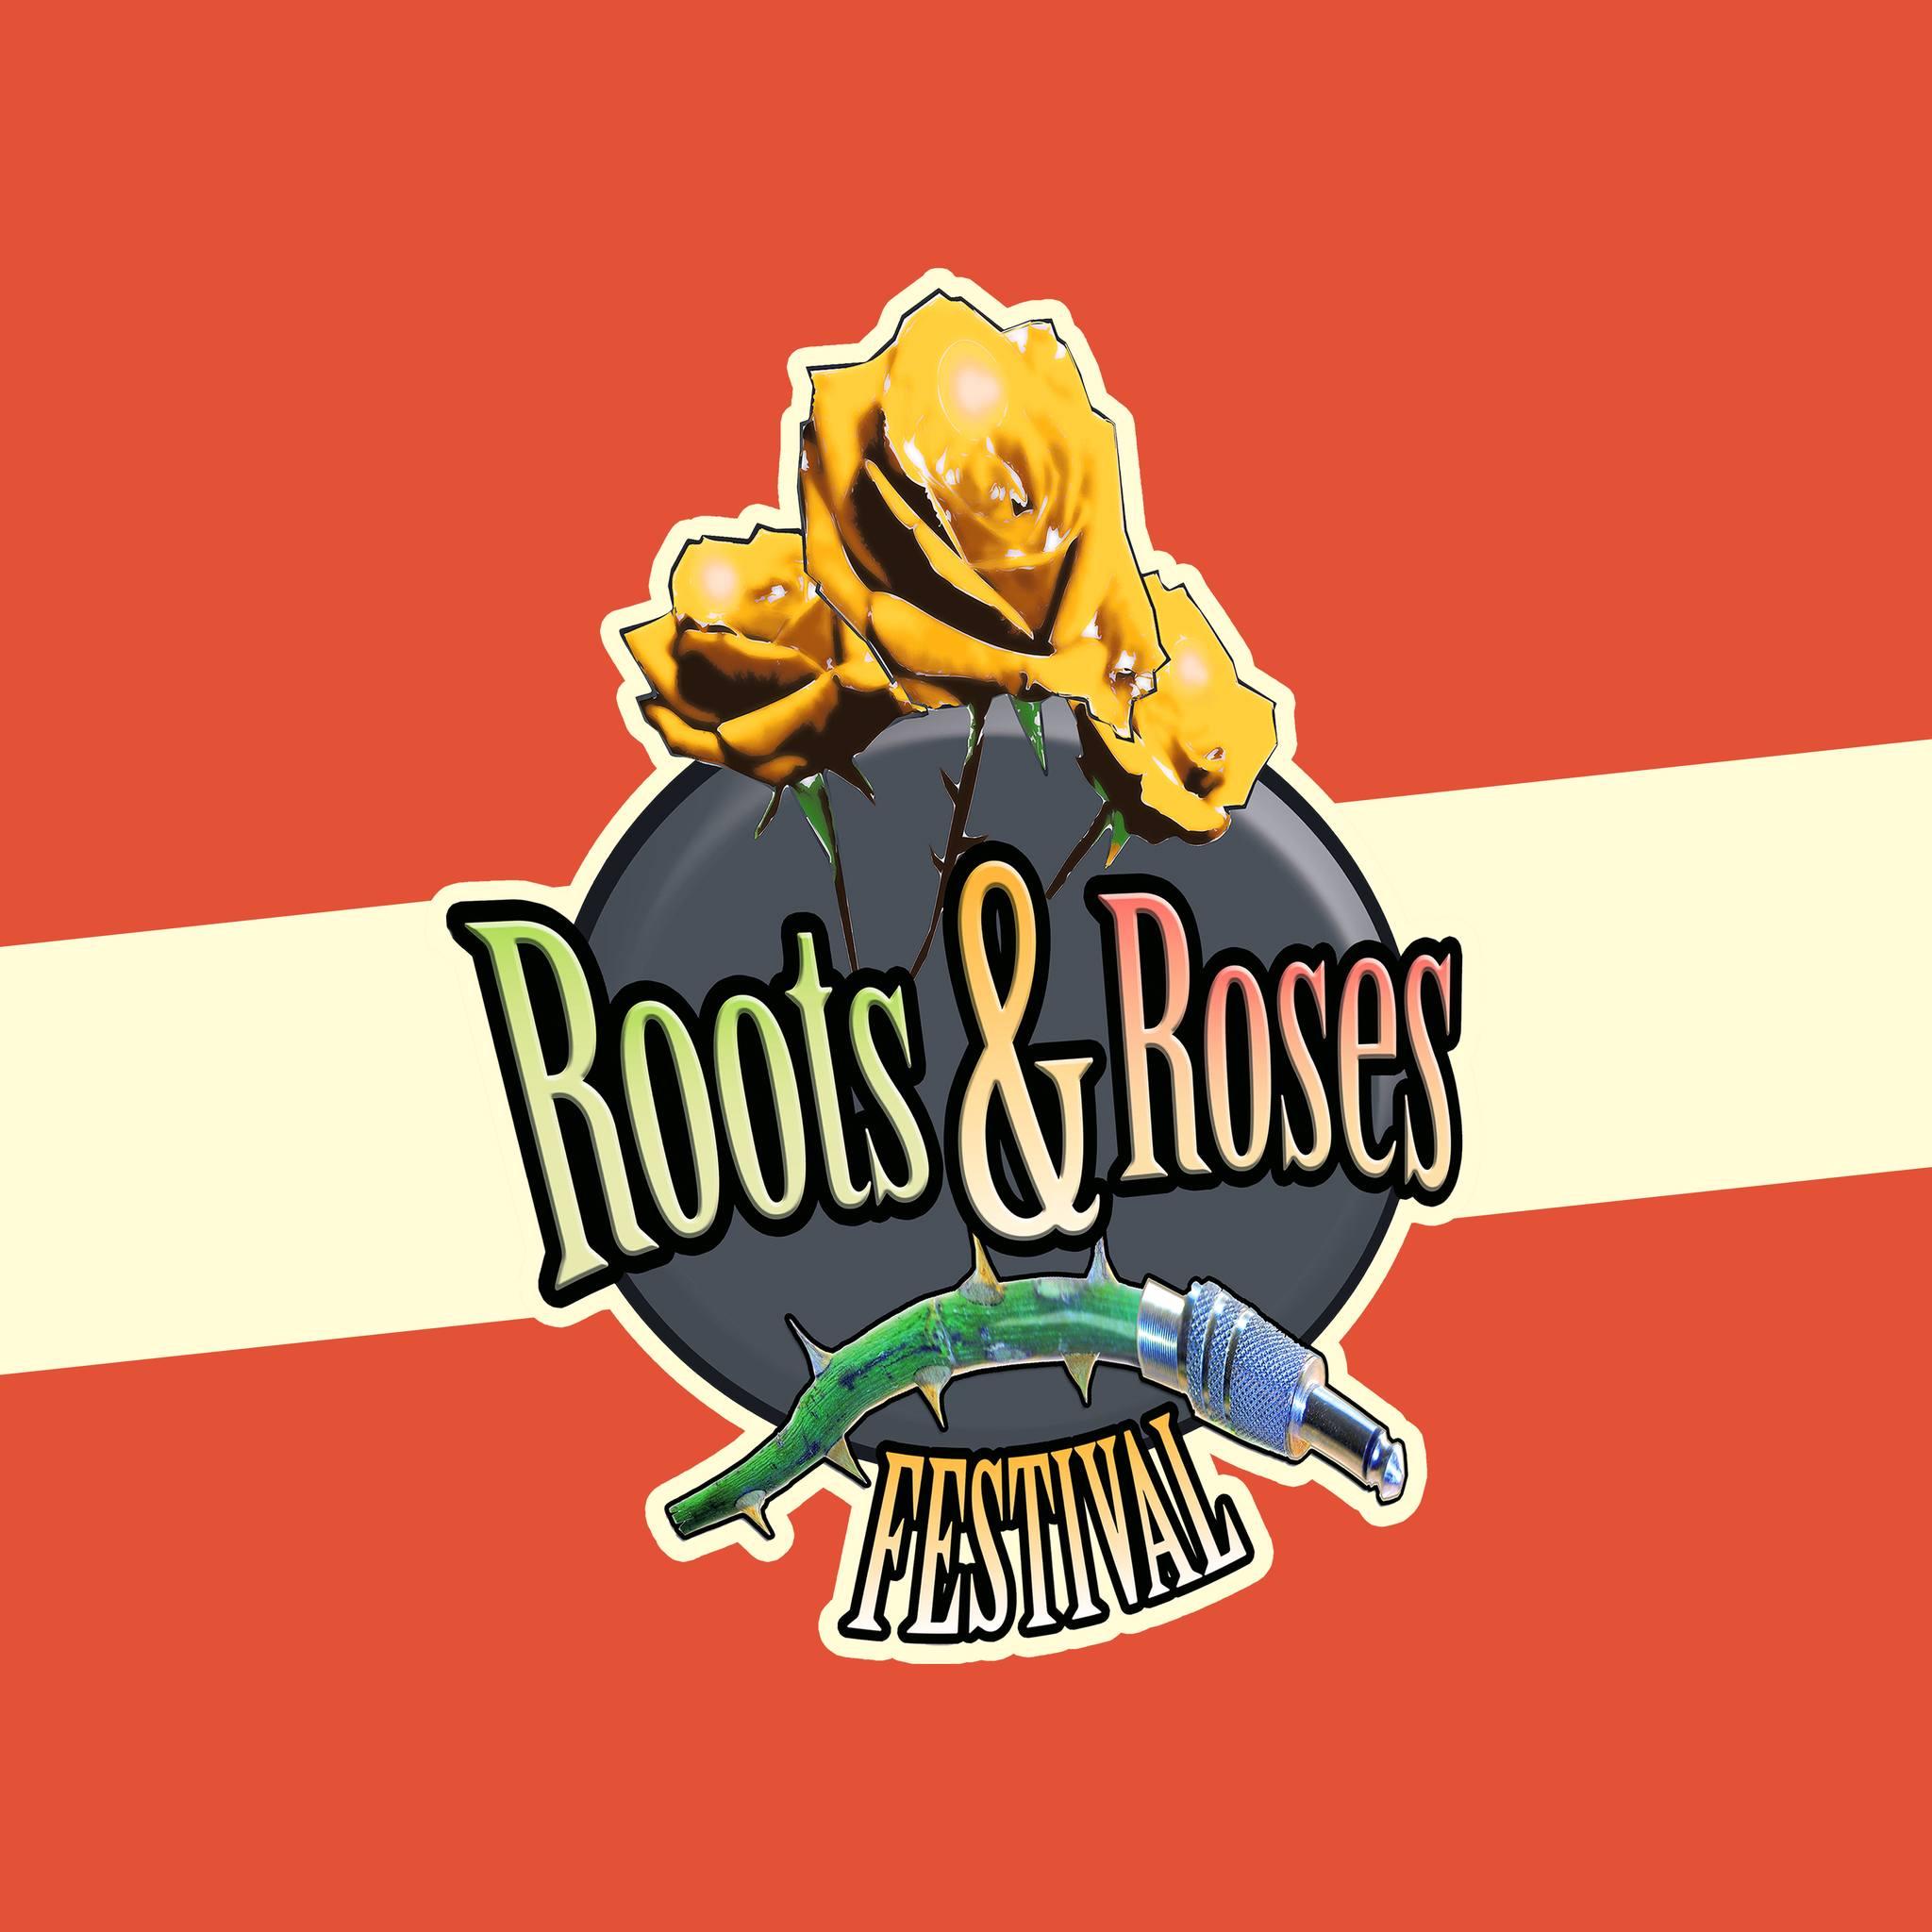 Roots & Roses Festival - Festival Lineup, Dates and Location | Viberate.com